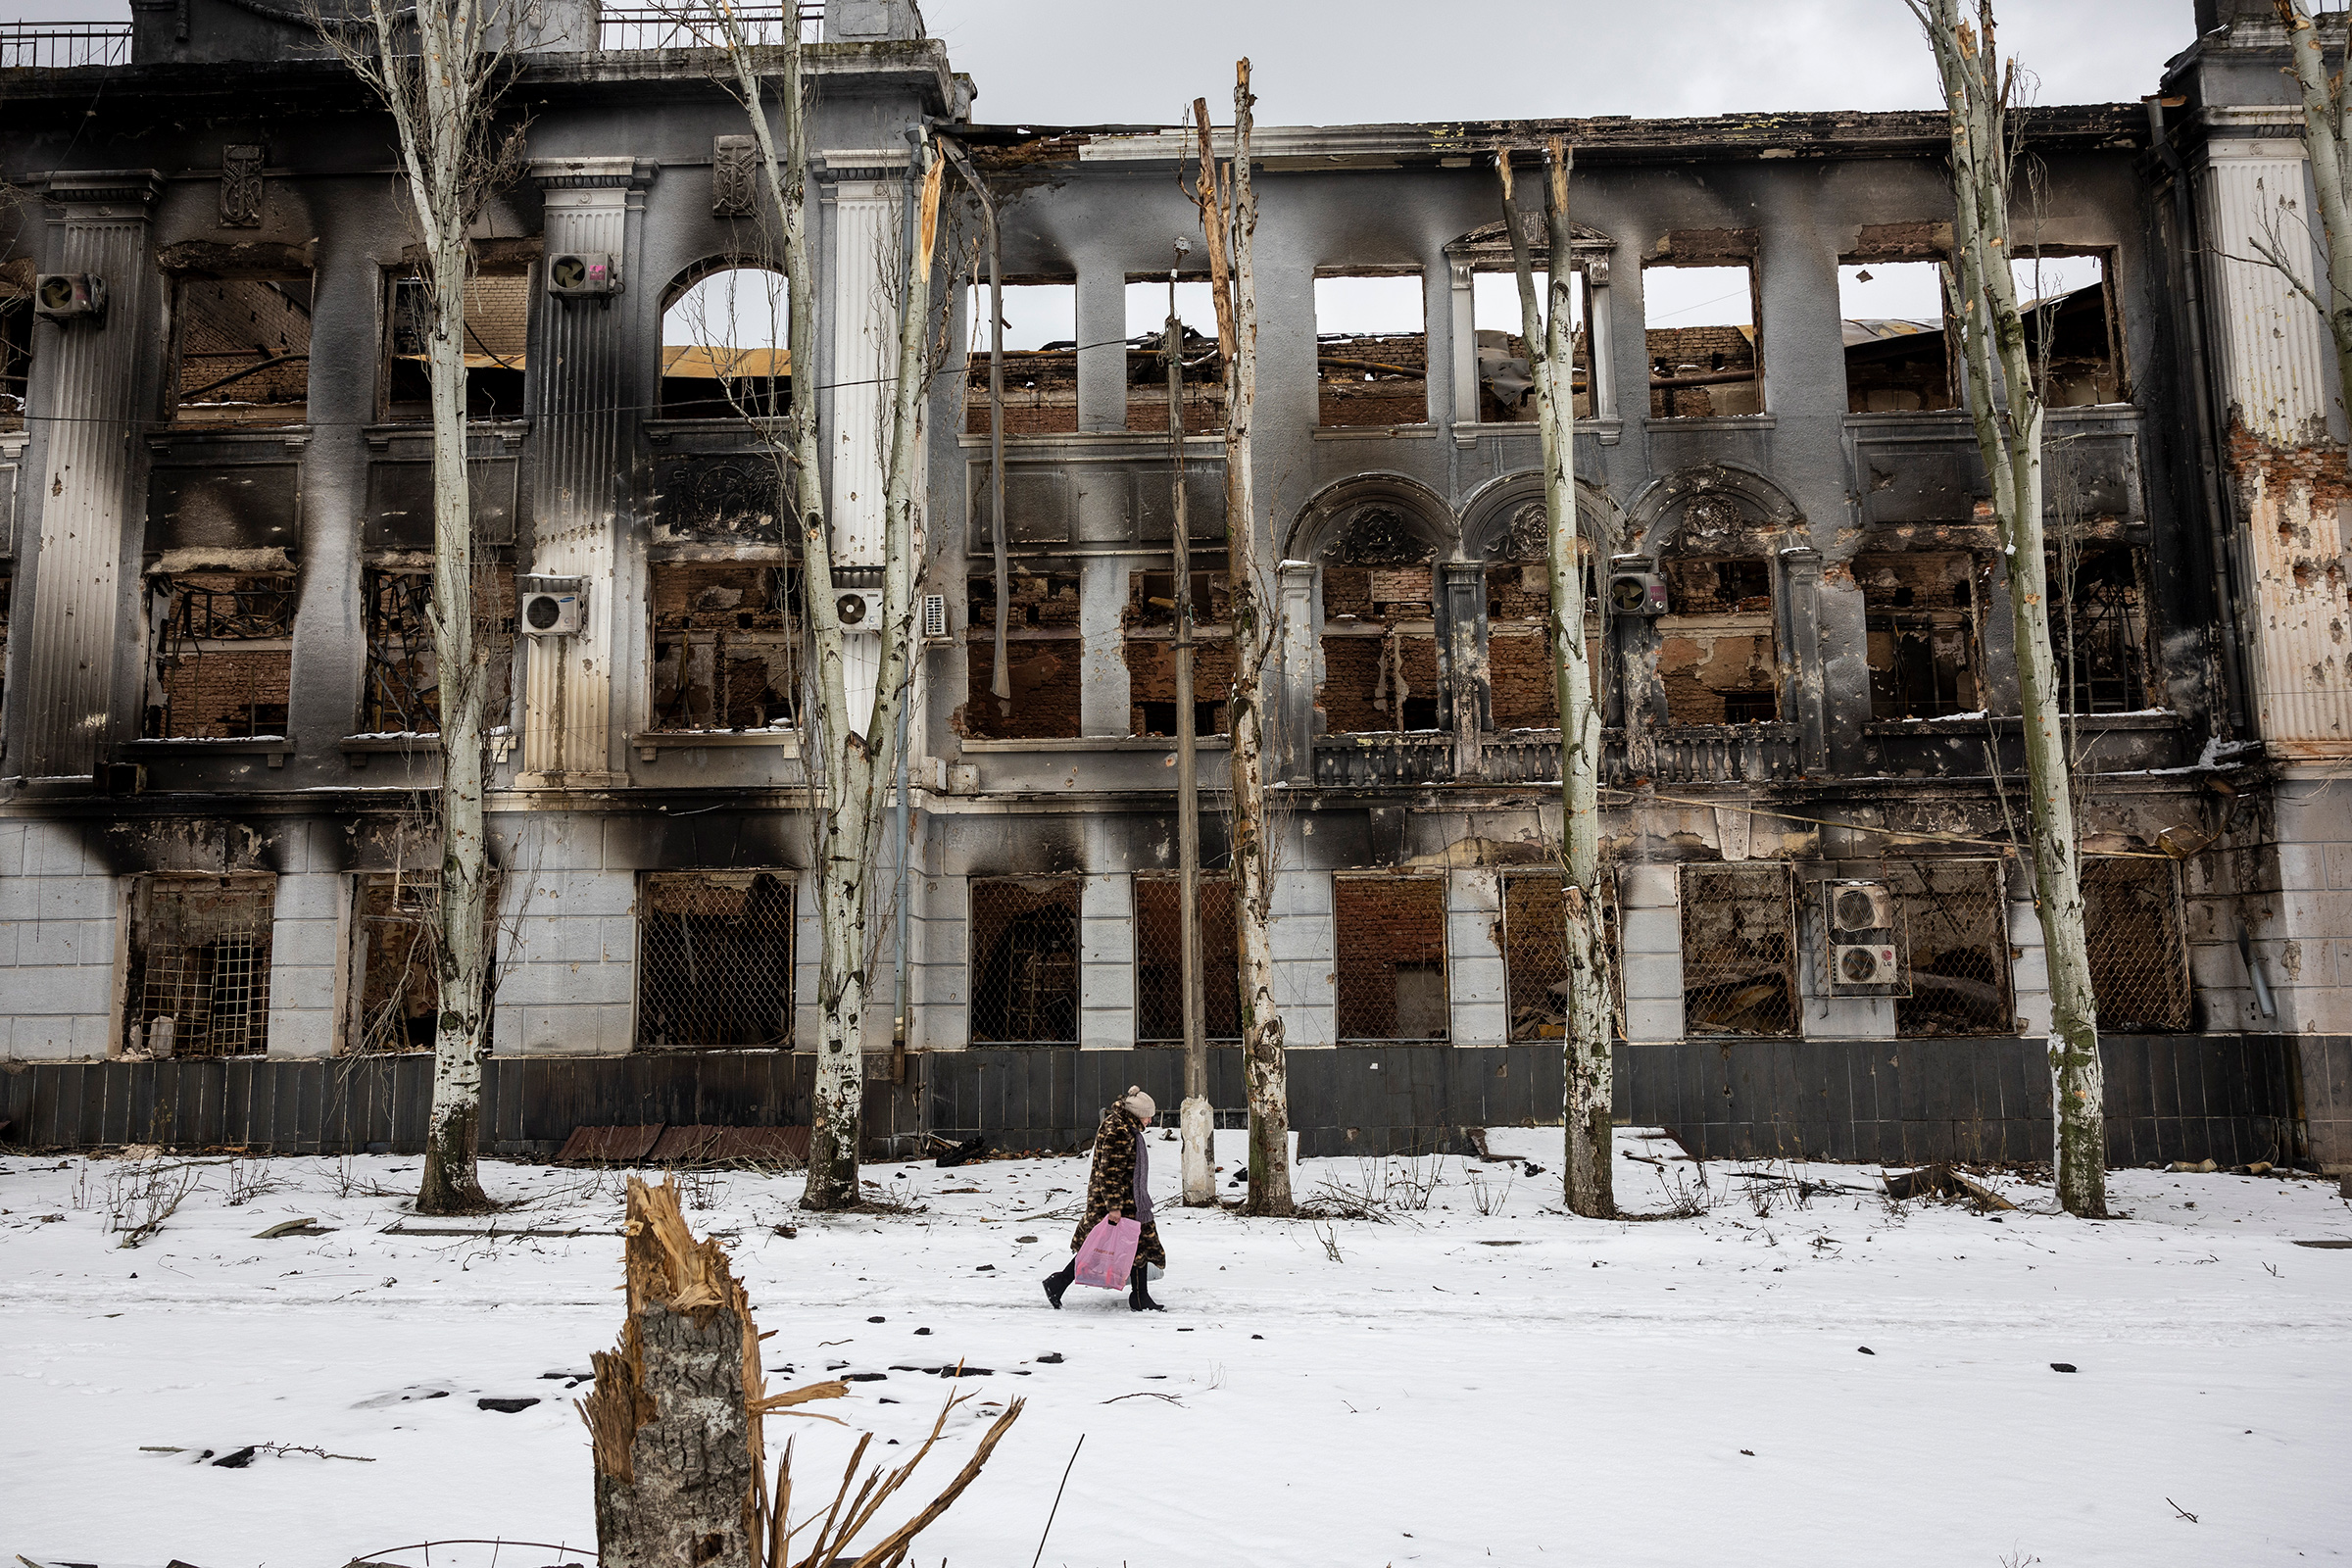 A local resident carries humanitarian aid while walking through a nearly deserted downtown area on Feb. 14 in Bakhmut, Ukraine. (John Moore—Getty Images)